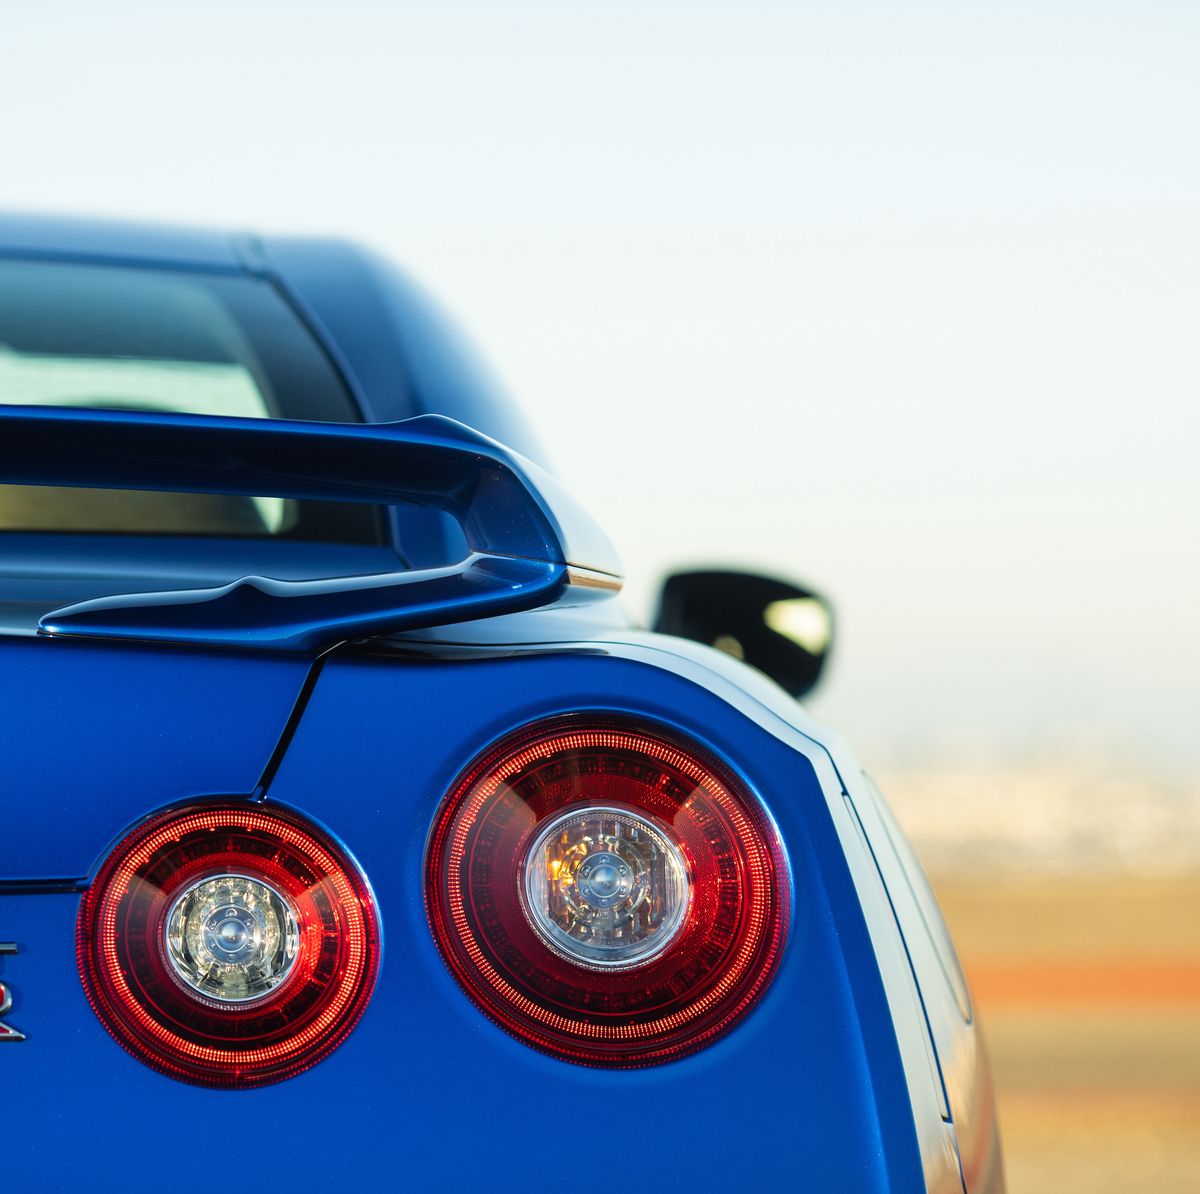 New Nissan GT-R 2023 detailed! R36 supercar due in two years to go